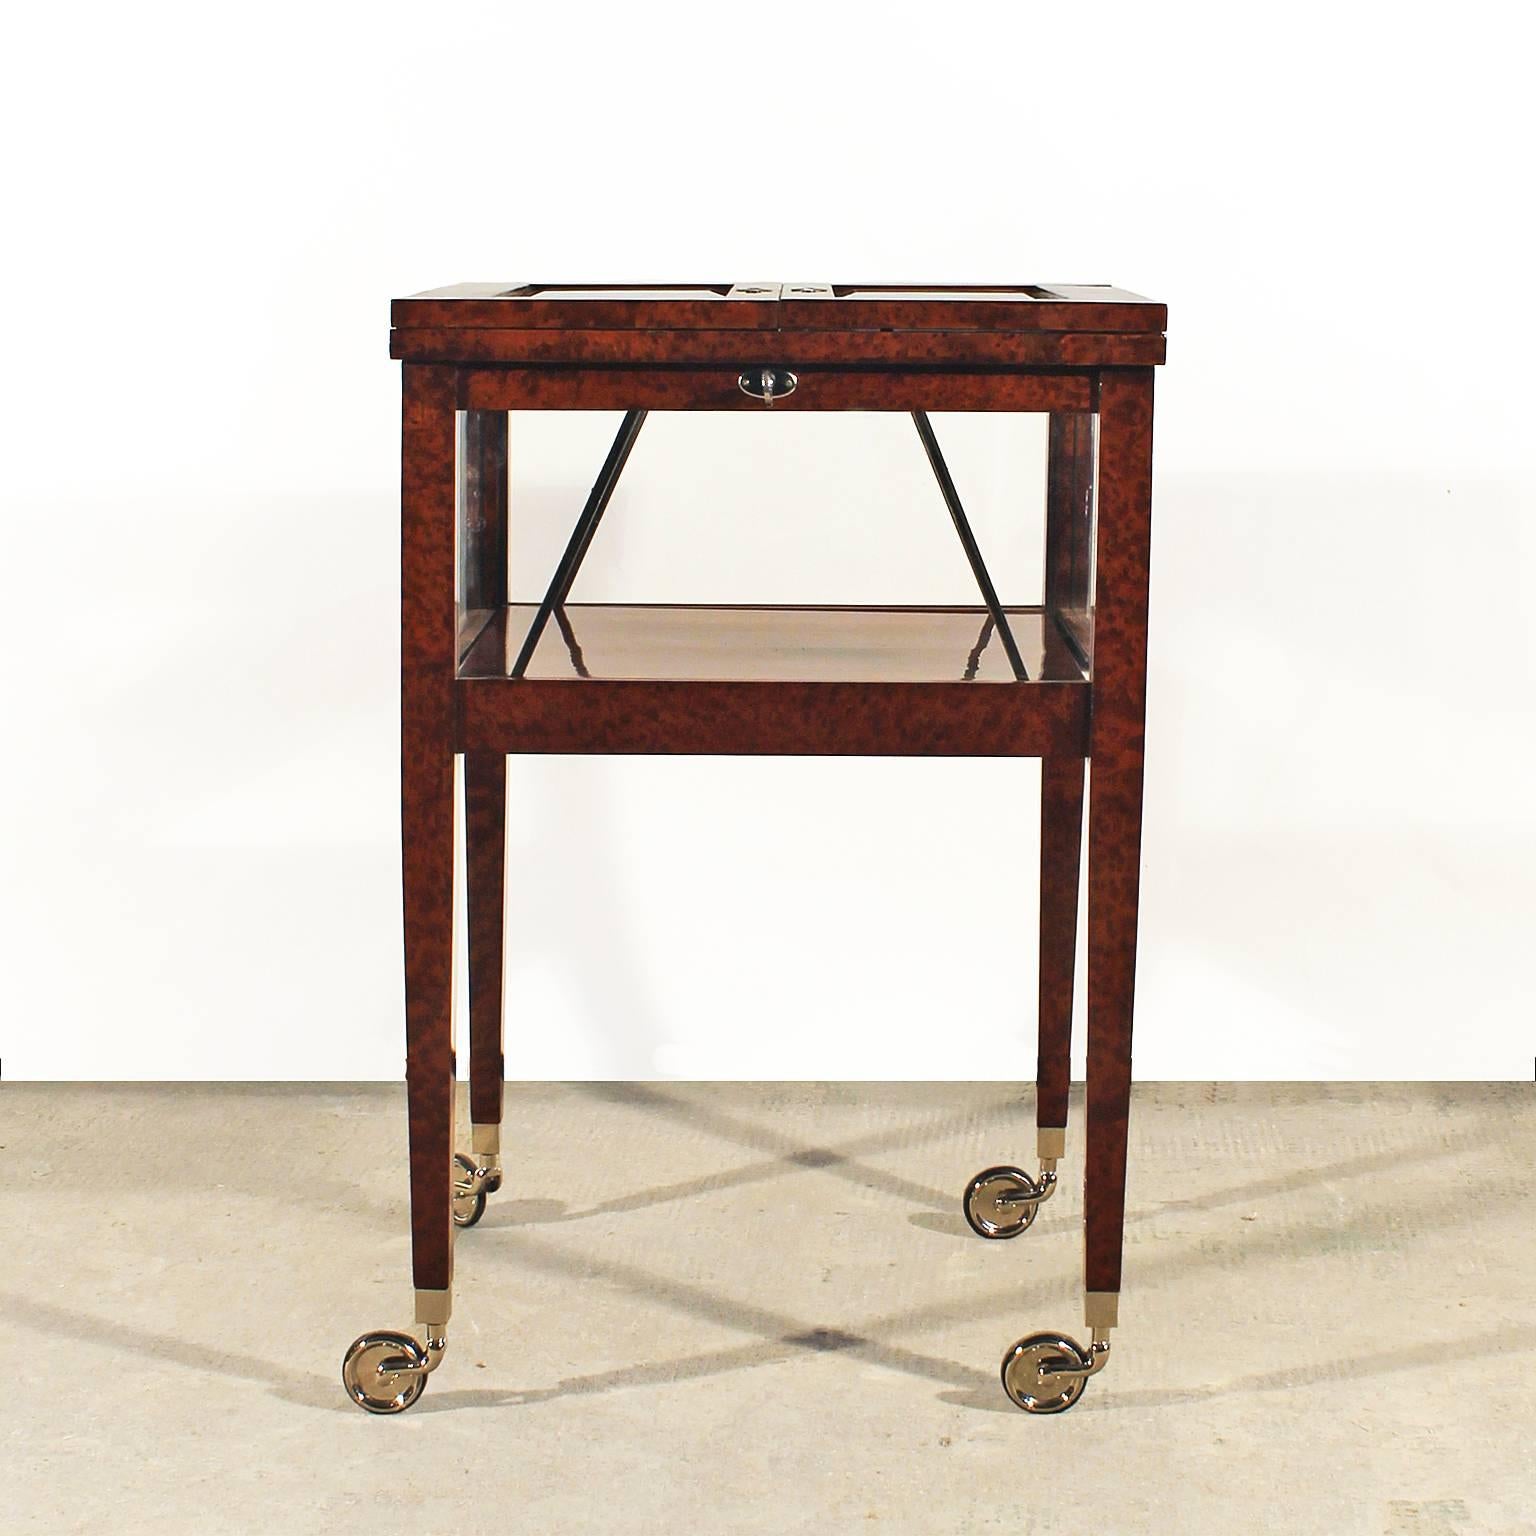 System Art Deco dry bar cart, burr walnut, French polish, with two doors on top with beveled glasses, nickel plated brass hardware.
By Bafico Paris-Buenos Aires,
France, circa 1930.

Measurement with open doors: 101 cm.